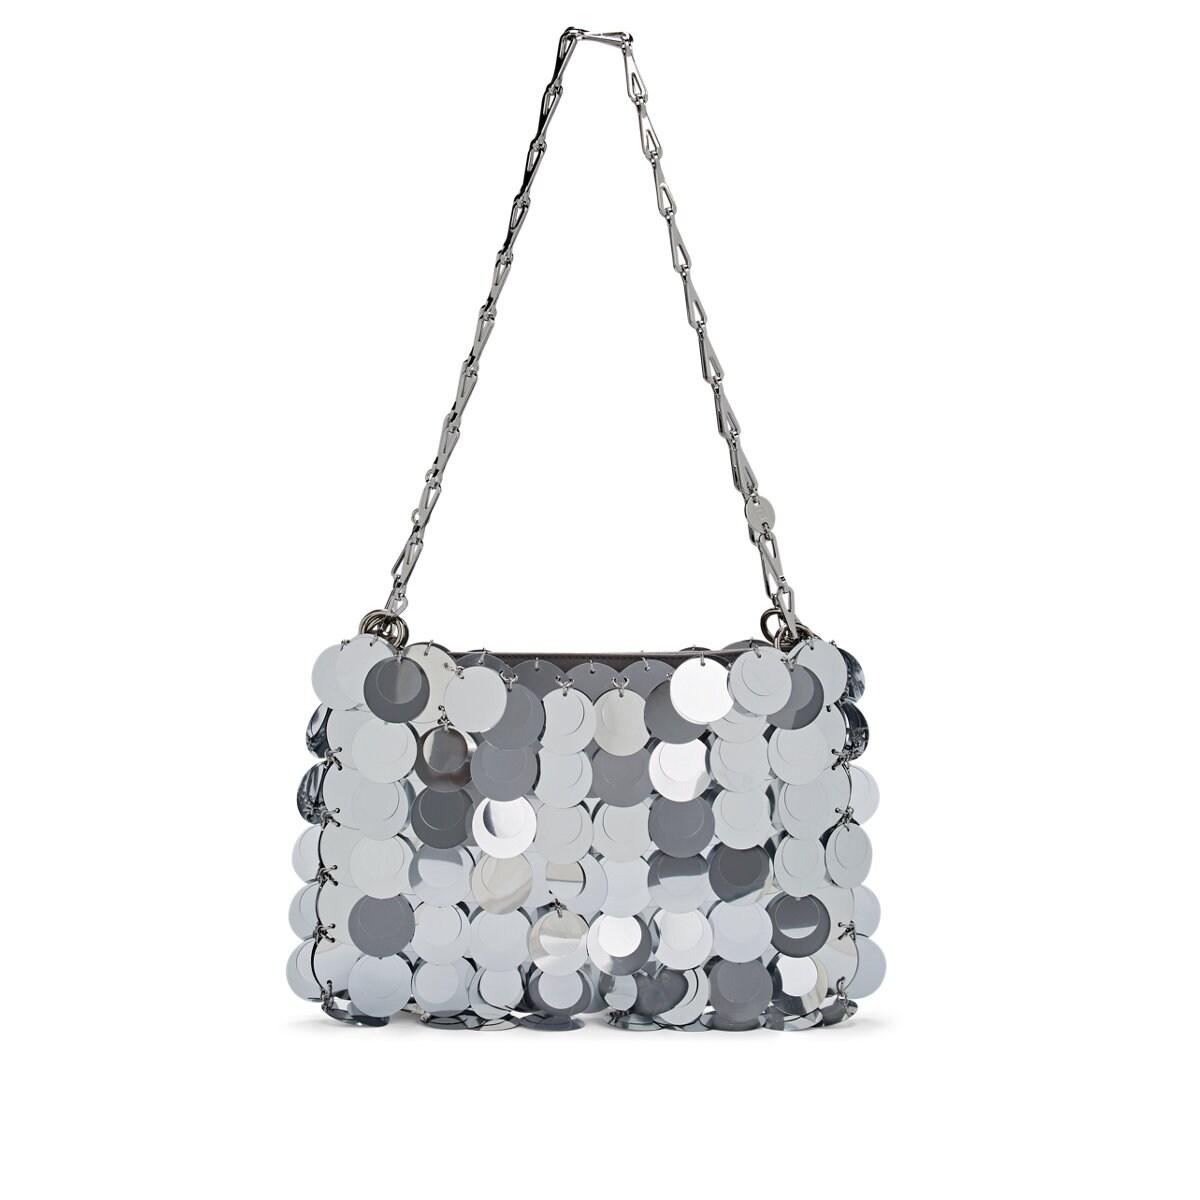 Paco Rabanne Satin Iconic Sparkle Shoulder Bag in Silver (Metallic) - Lyst